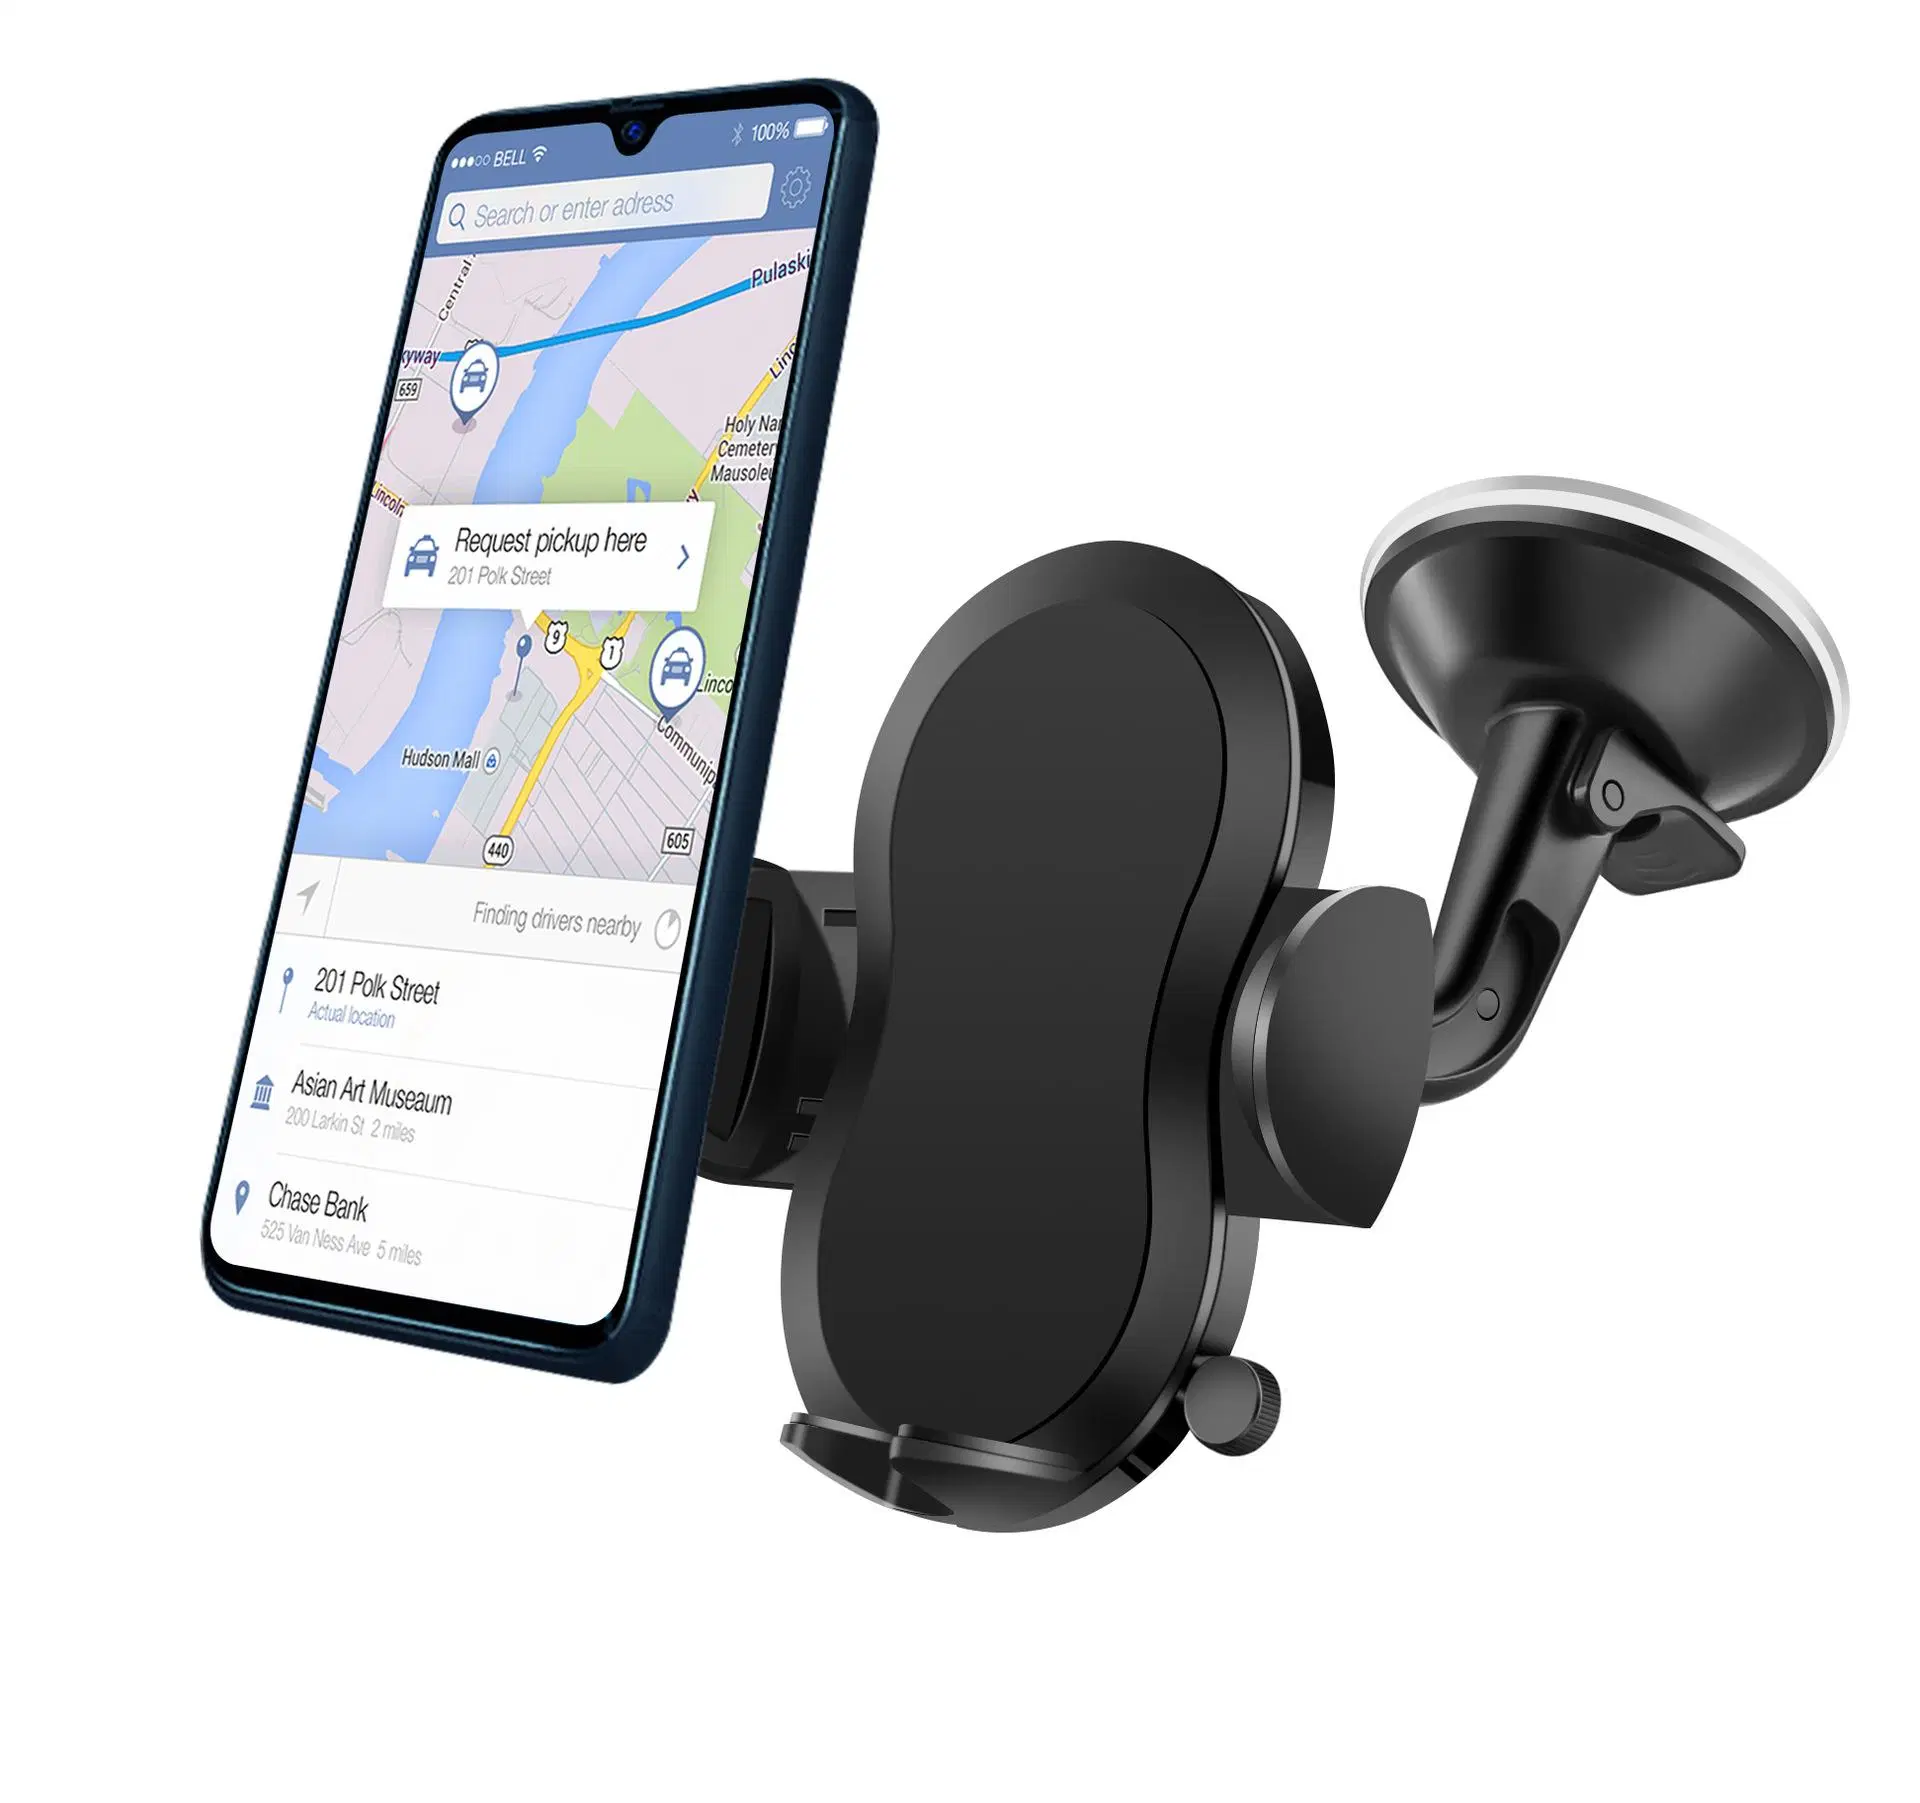 Phone Mount for Car Long Arm Car Phone Holder Mount Dashboard Windshield Air Vent Clip Universal Cell Phone Holder Car for All Mobile Phones